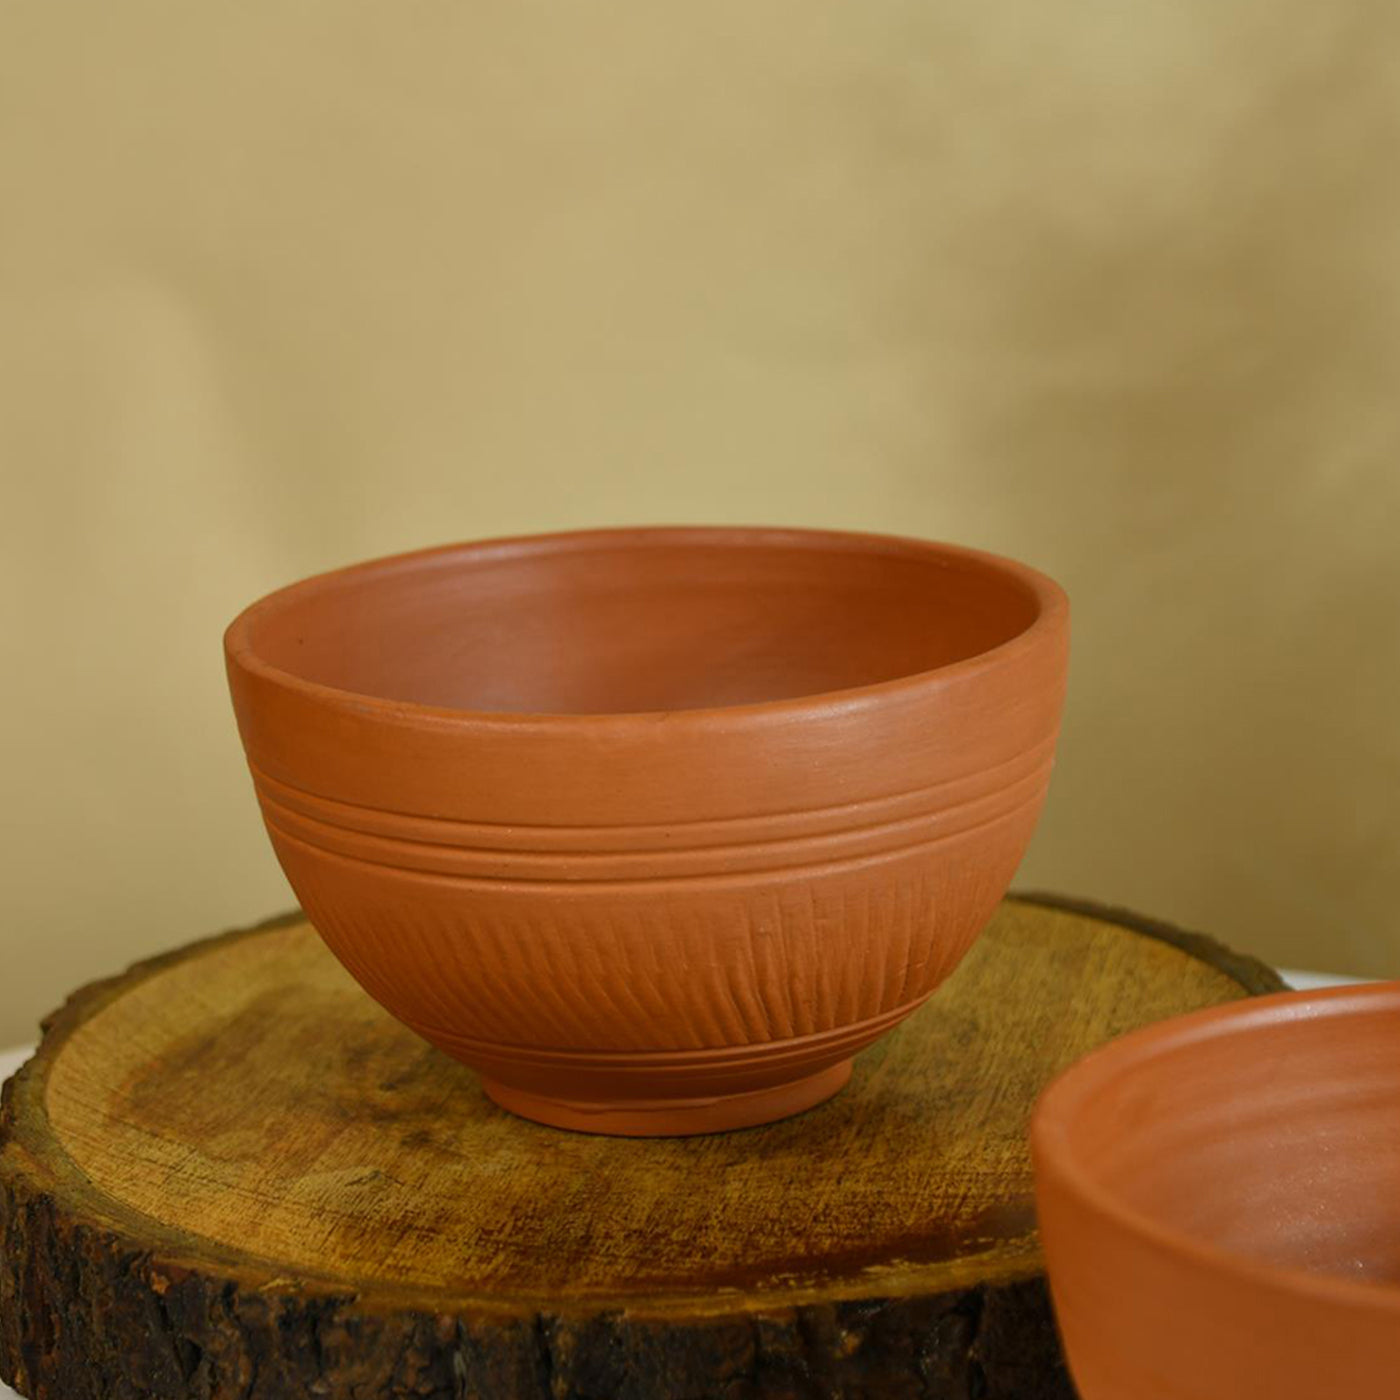 Handcrafted Terracotta Soup Bowl Artful Kitchenware & Decor